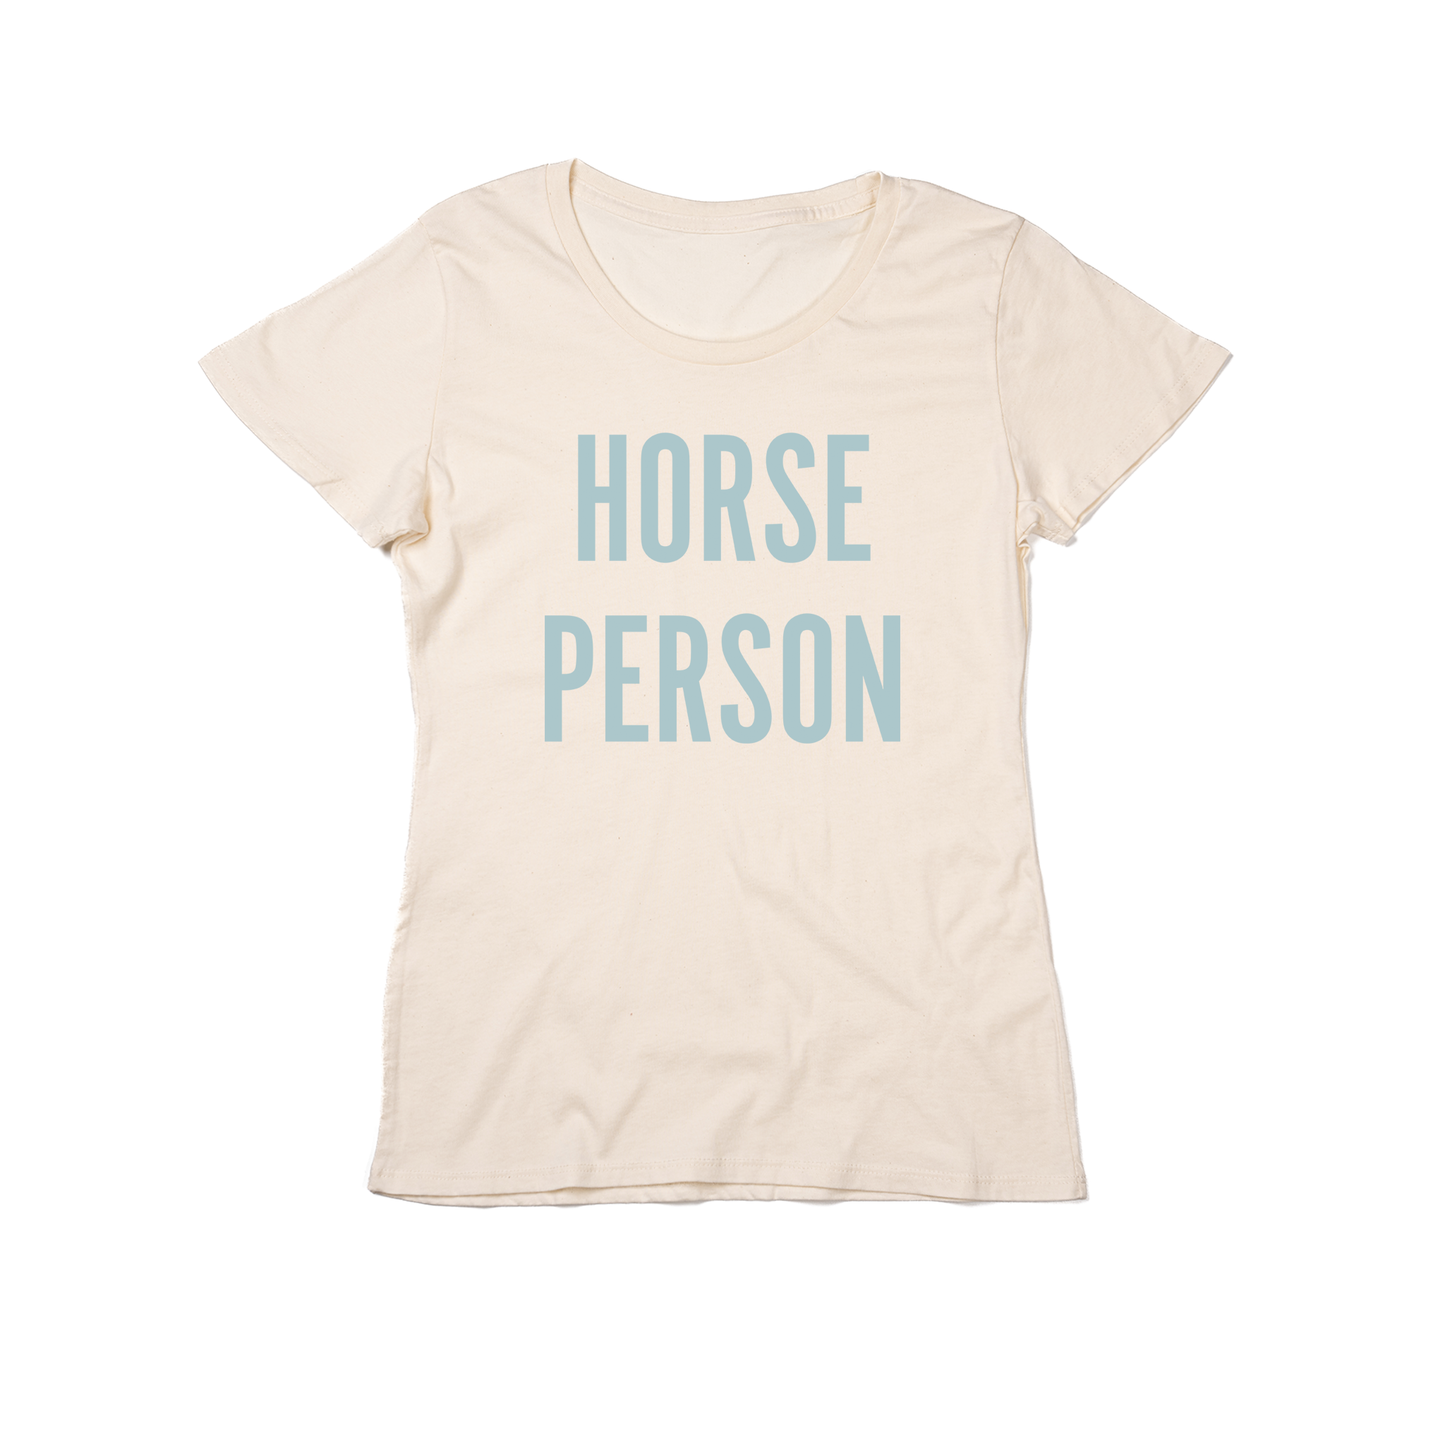 Horse Person (Sky) - Women's Fitted Tee (Natural)